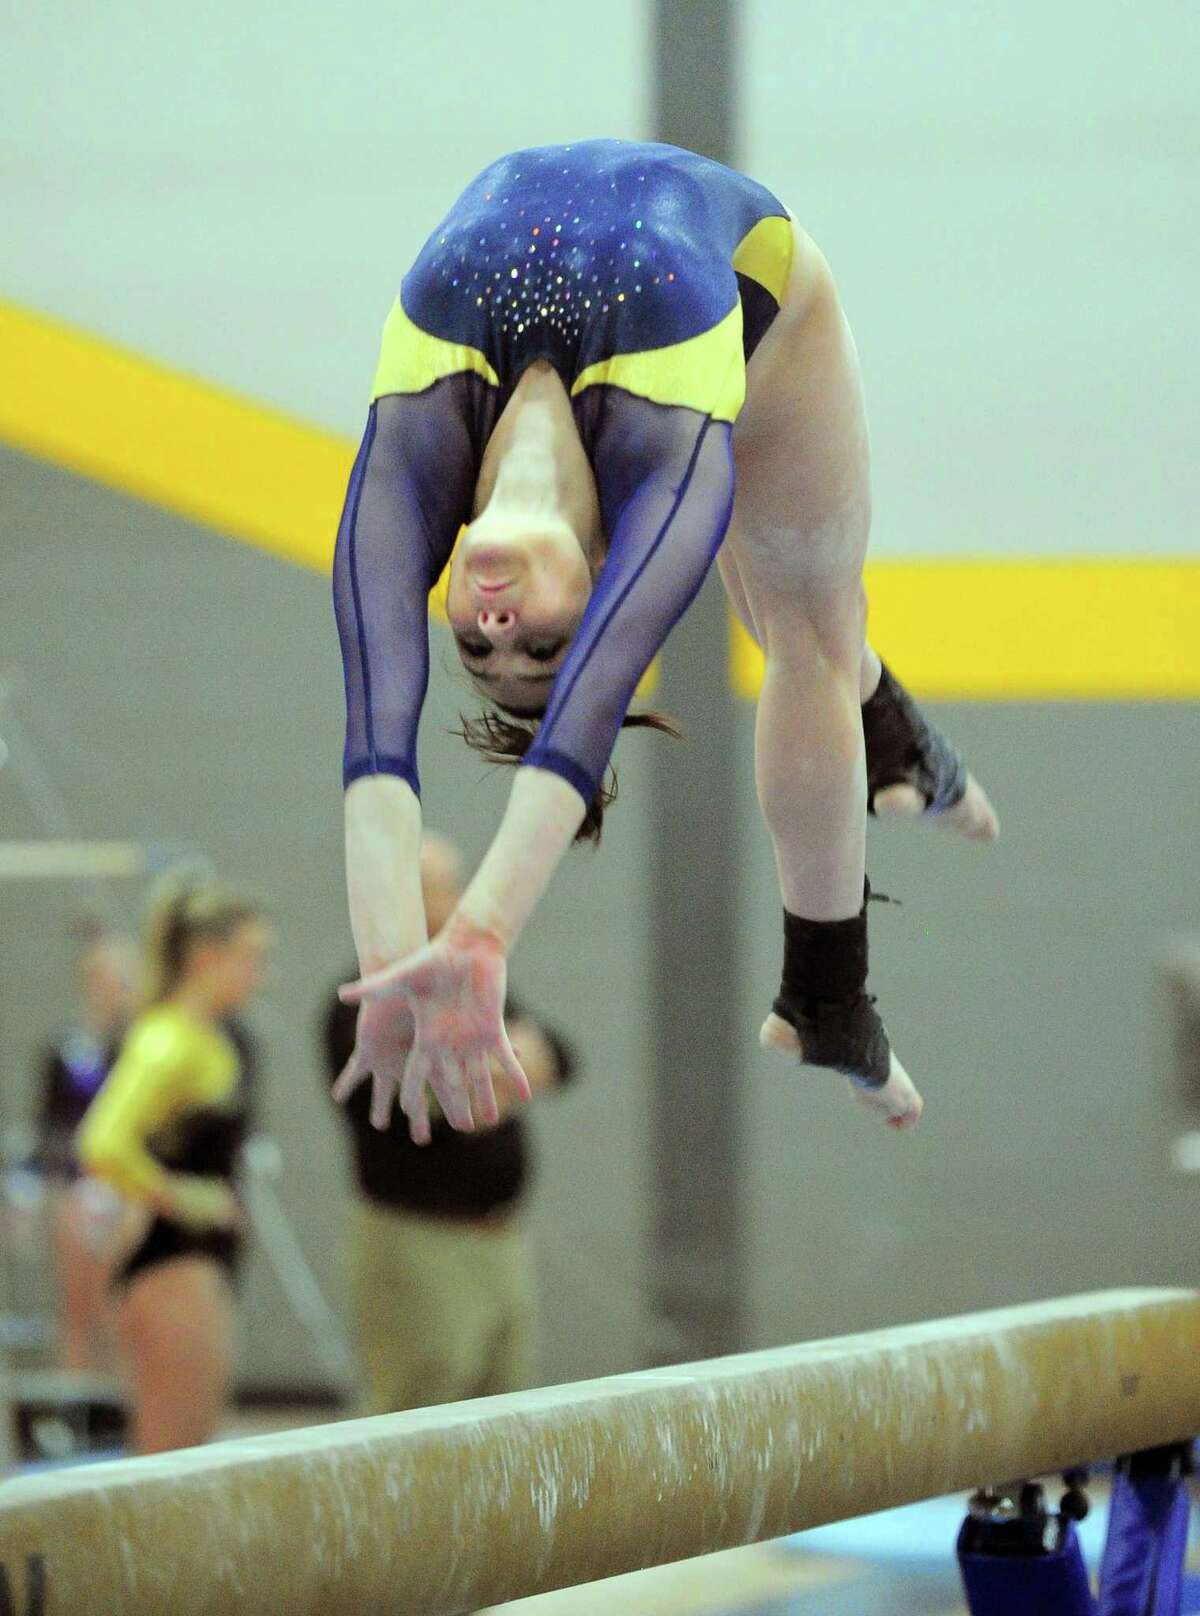 Woodstock Academy's Allison Crescimmano competes on the balance beam during CIAC Class S Gymnastics Championship action in Milford, Conn., on Saturday Feb. 23, 2019.